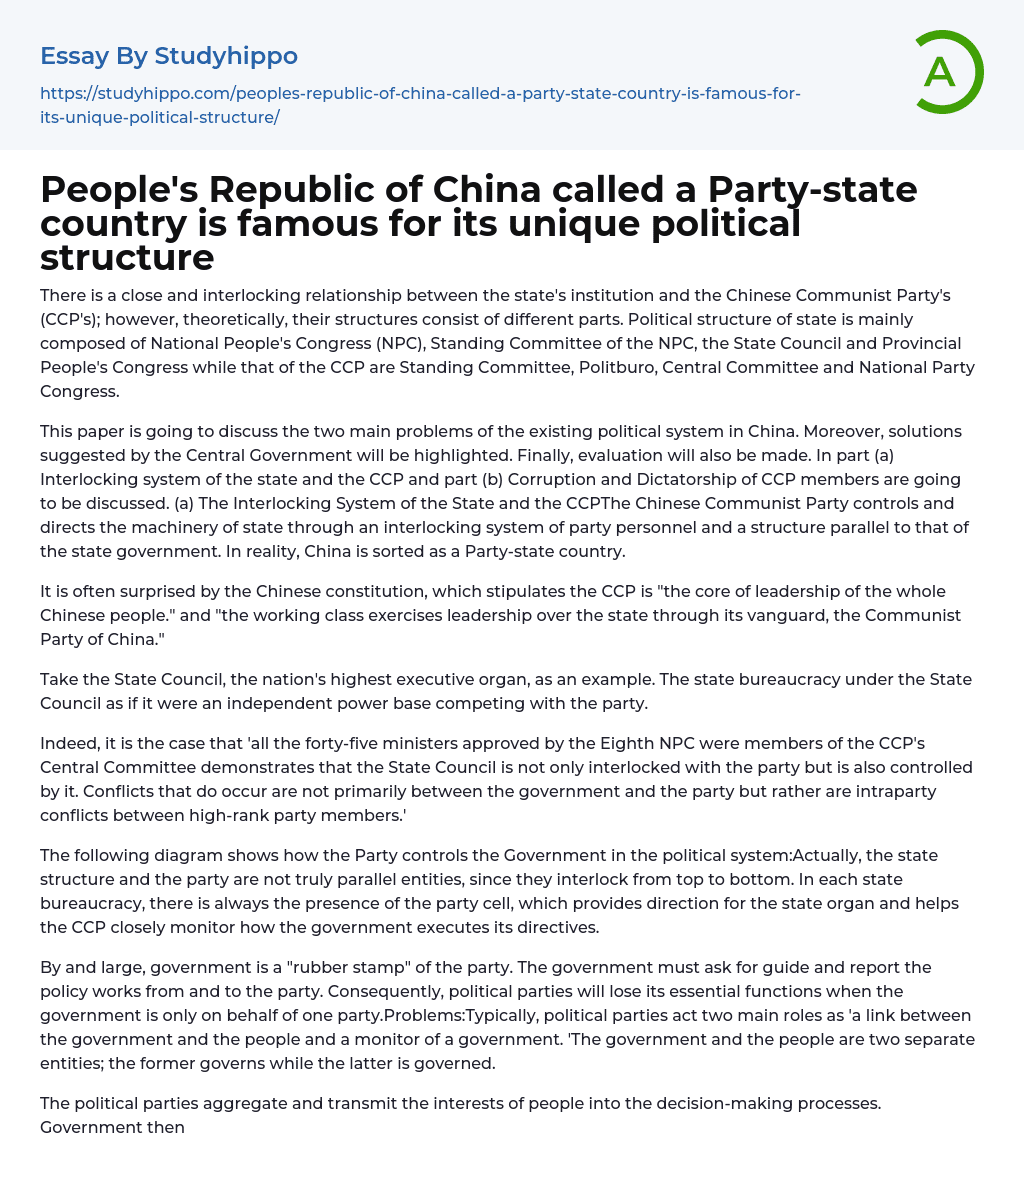 State and CCP Political Structures in China